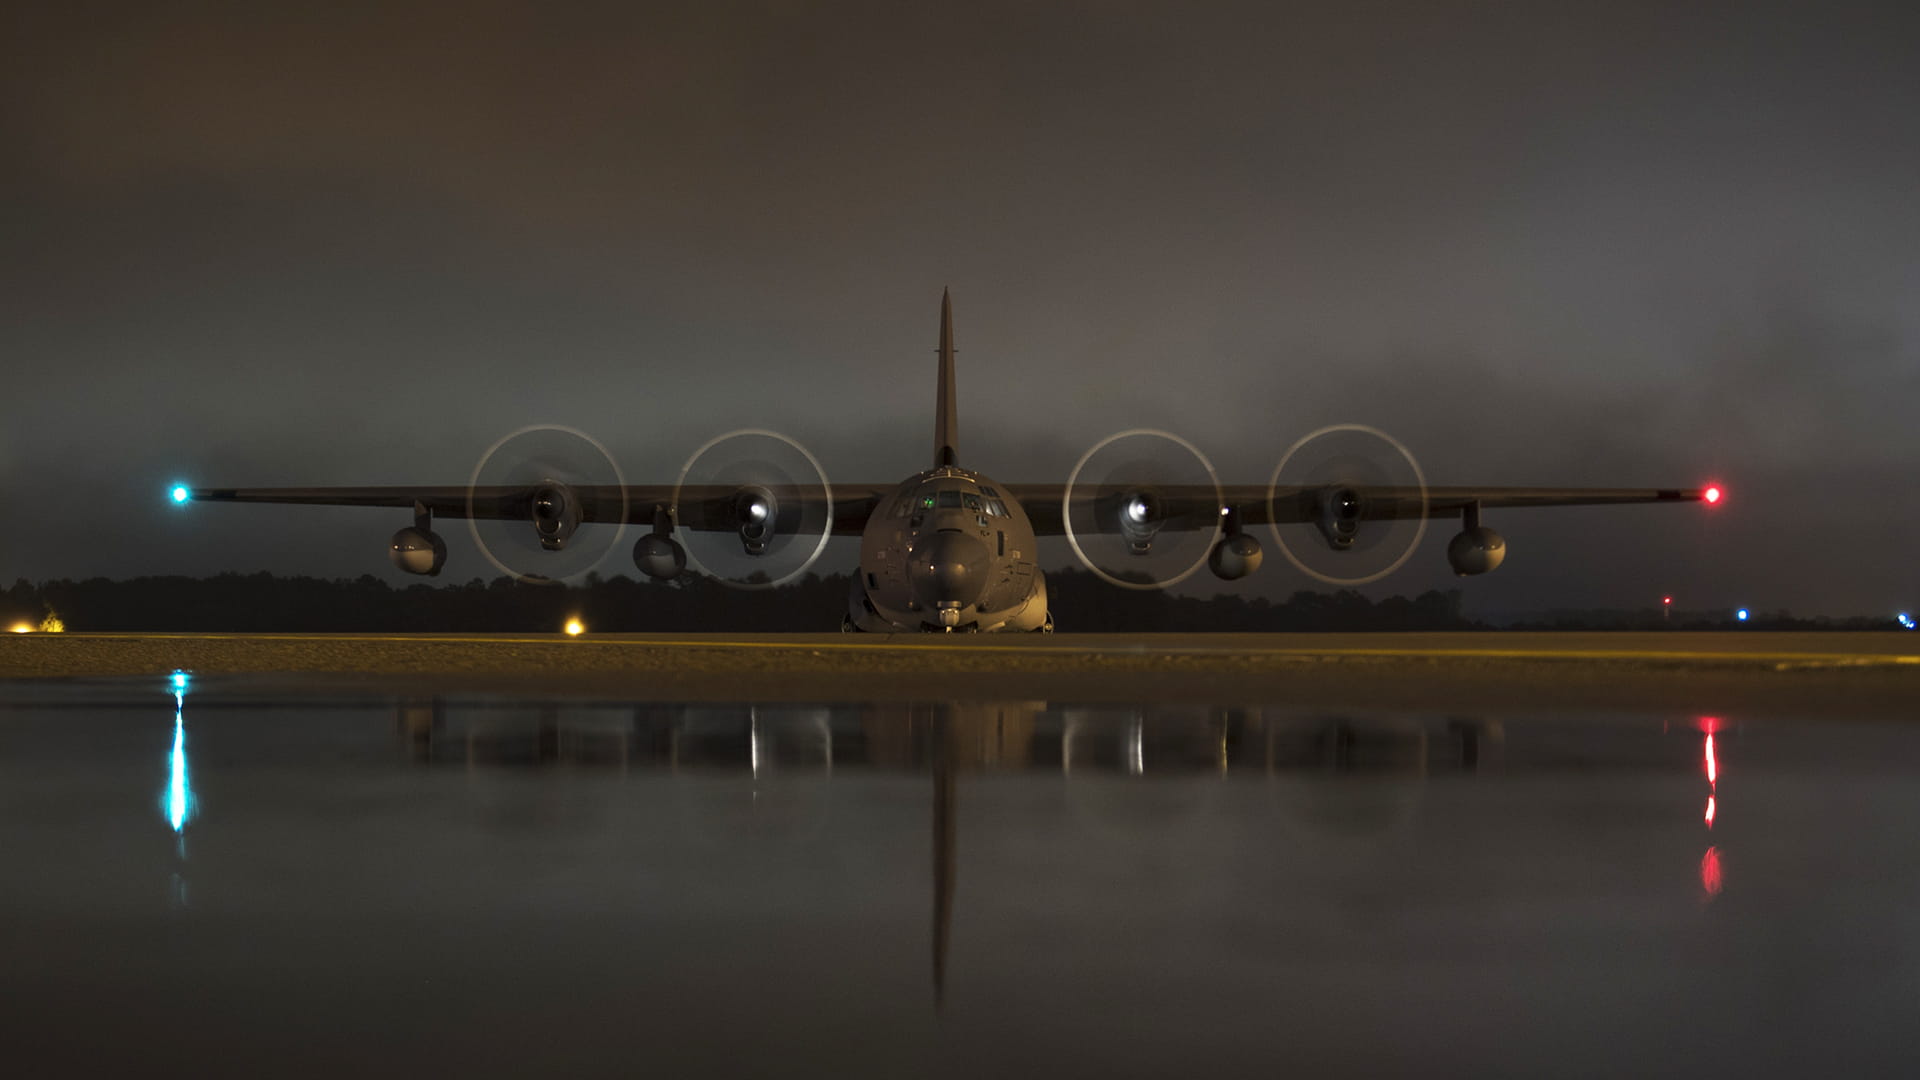 Military C-130 plane with propeller spinning